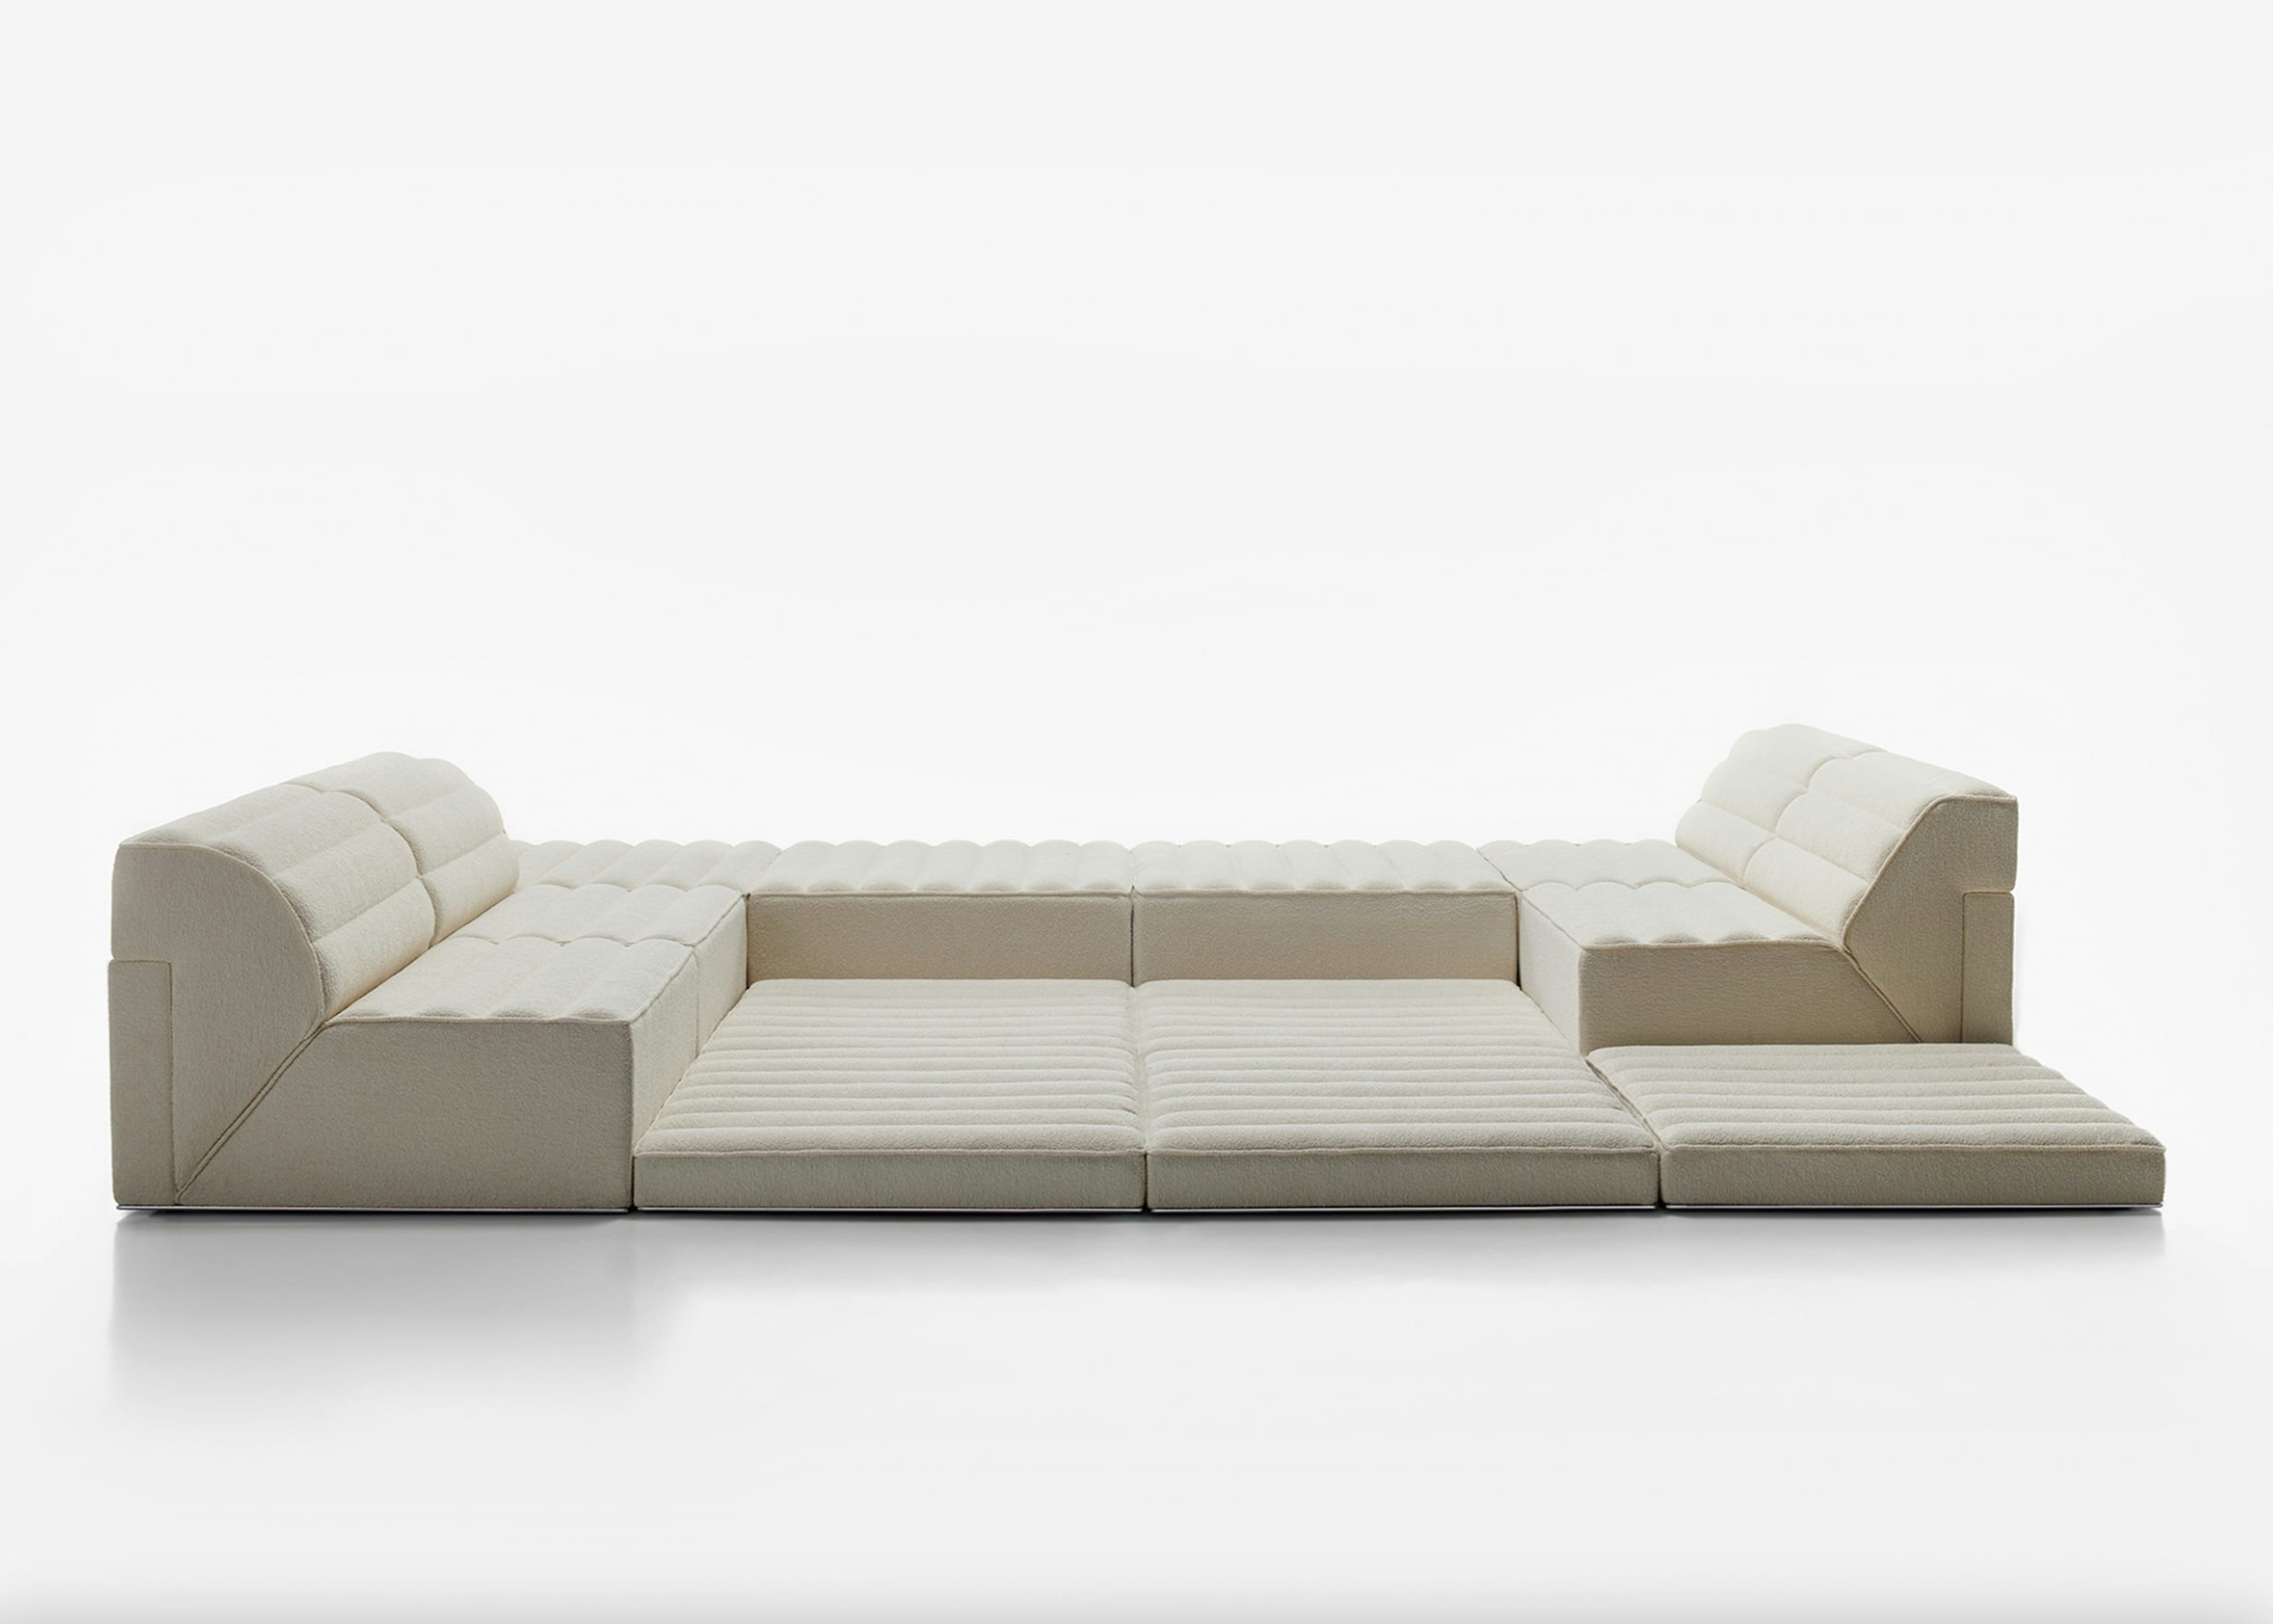 Image of couch